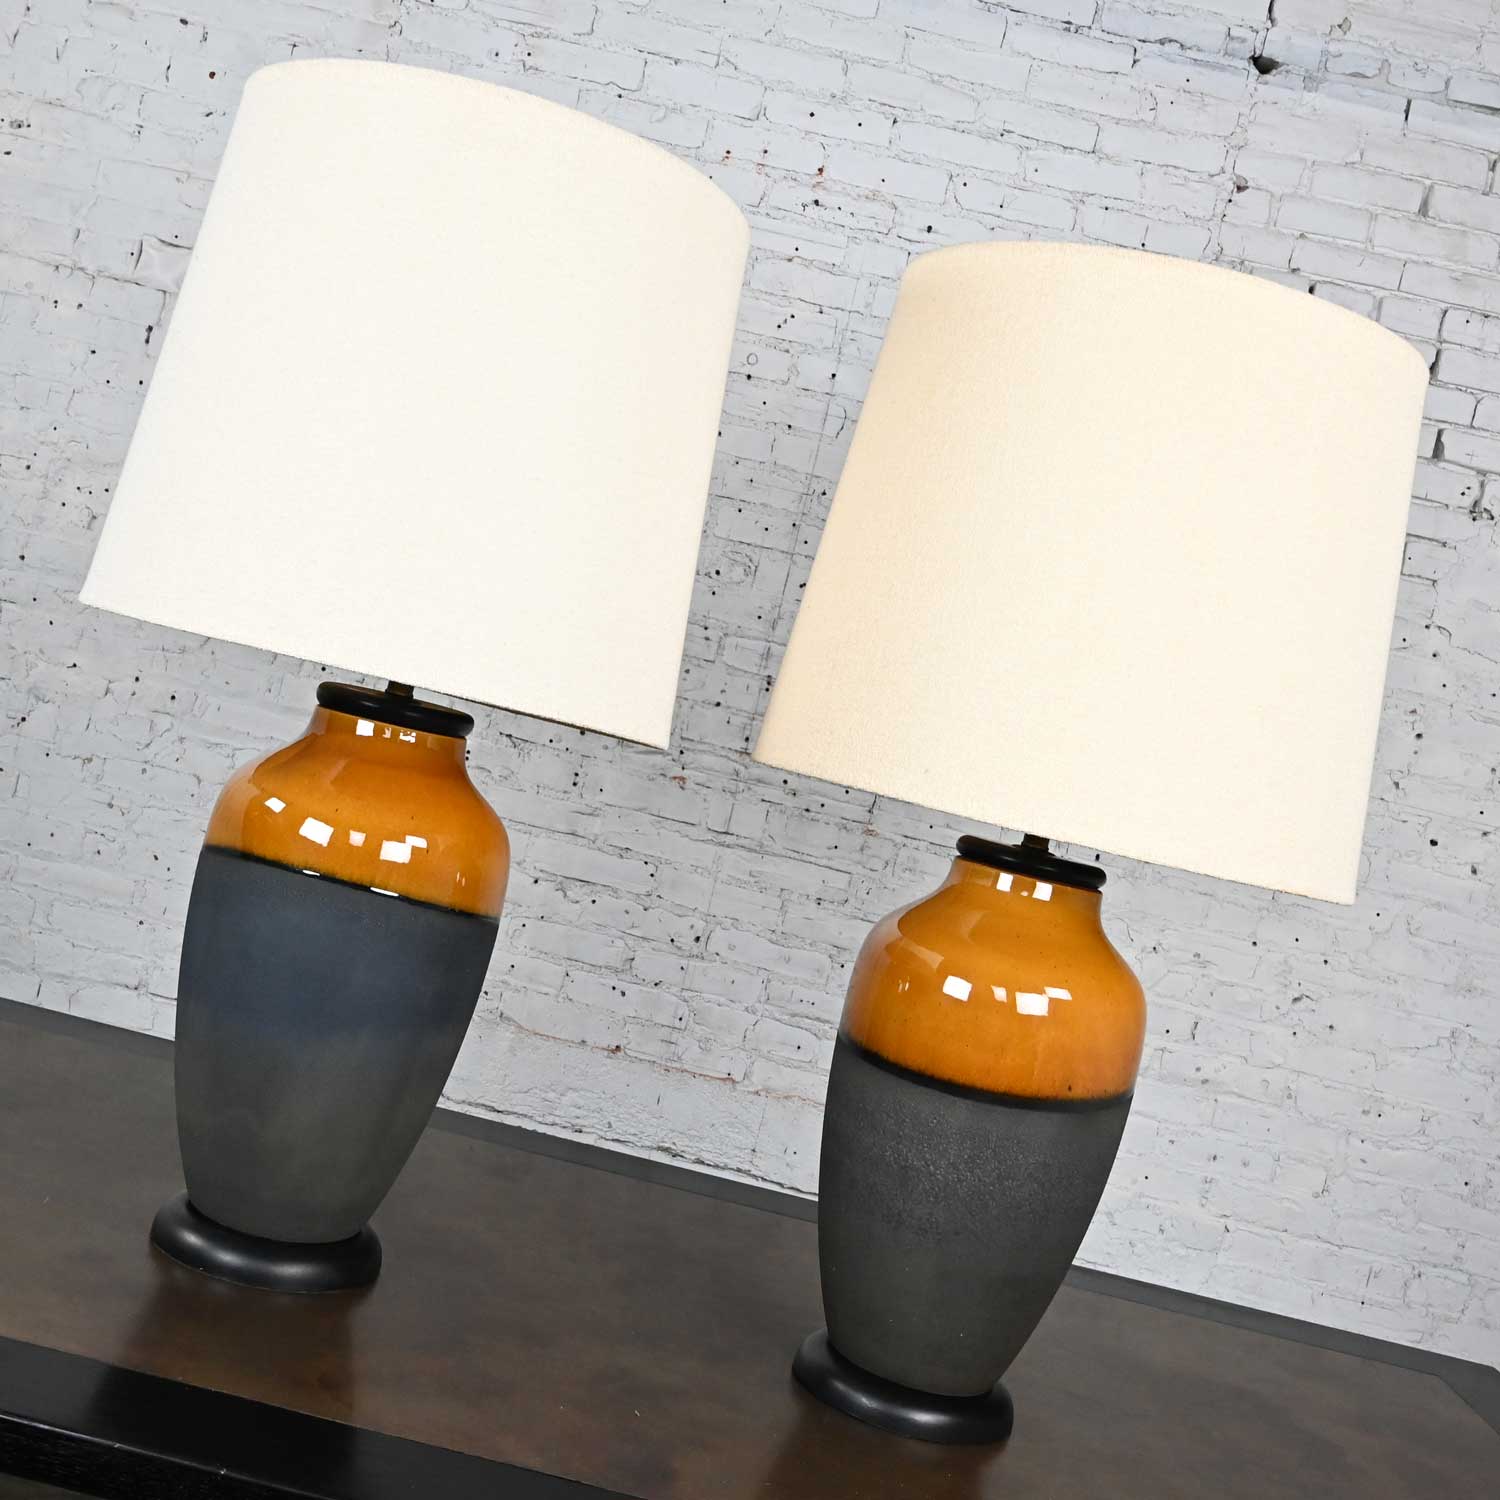 Vintage Mid Century Modern Black Matte & Gold Glazed Large Scale Table Lamps by Carstens Tonnieshof Germany